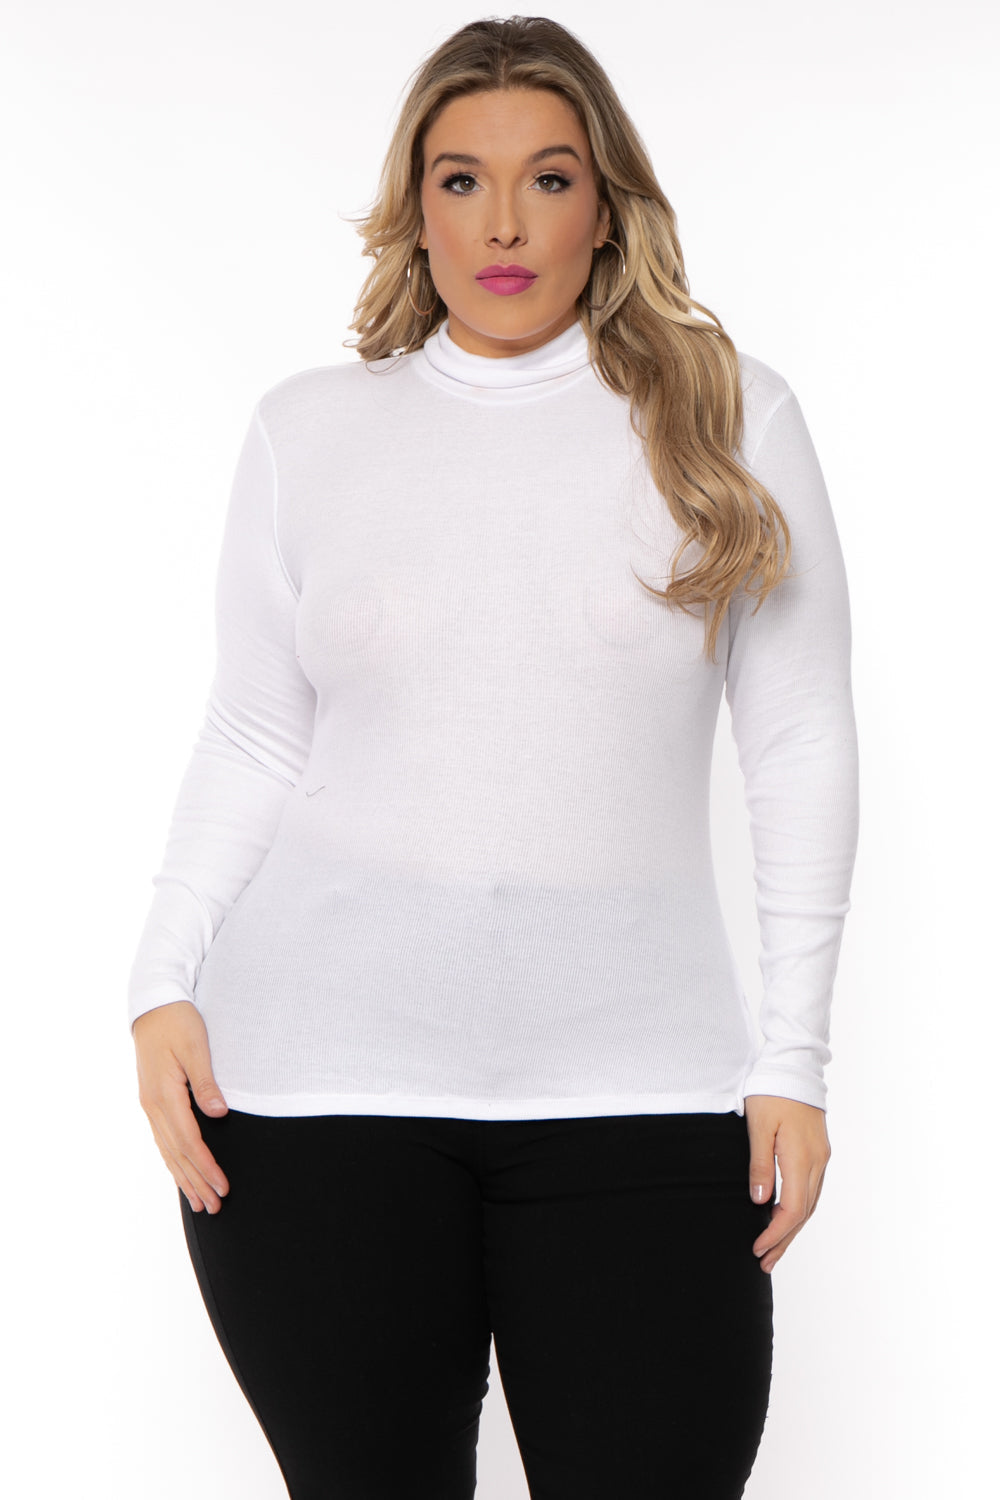 Ambiance Tops 1X / White Plus Size Ribbed Turtleneck Top - White